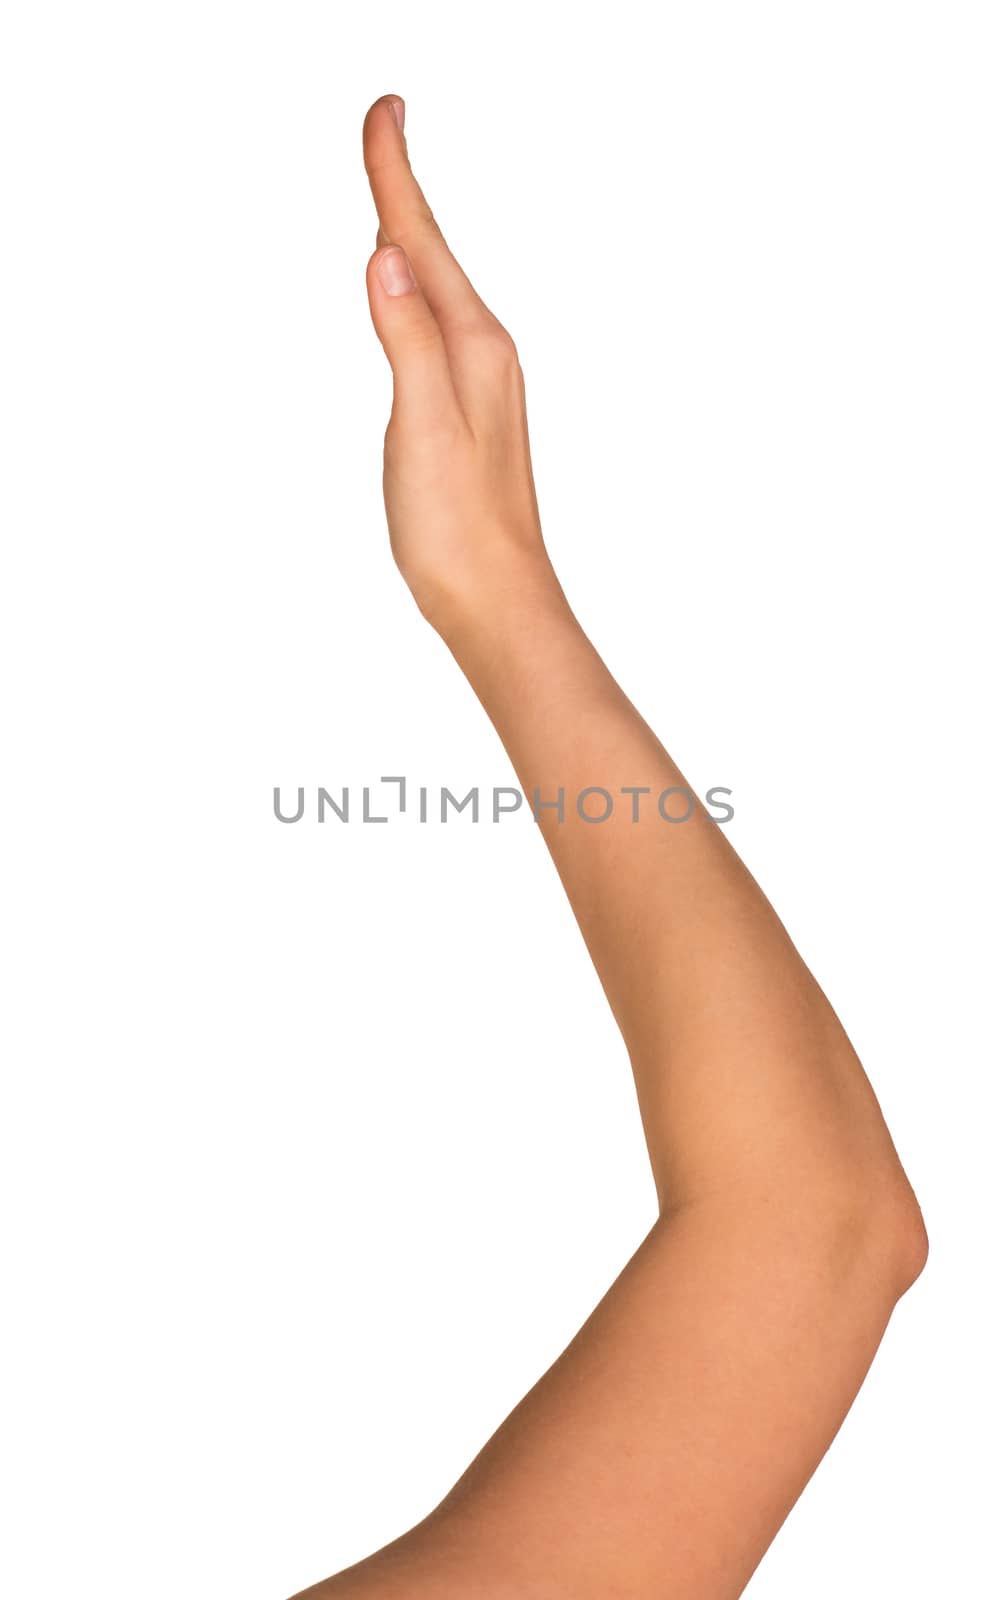 The open hand of a young woman. Isolated on white background